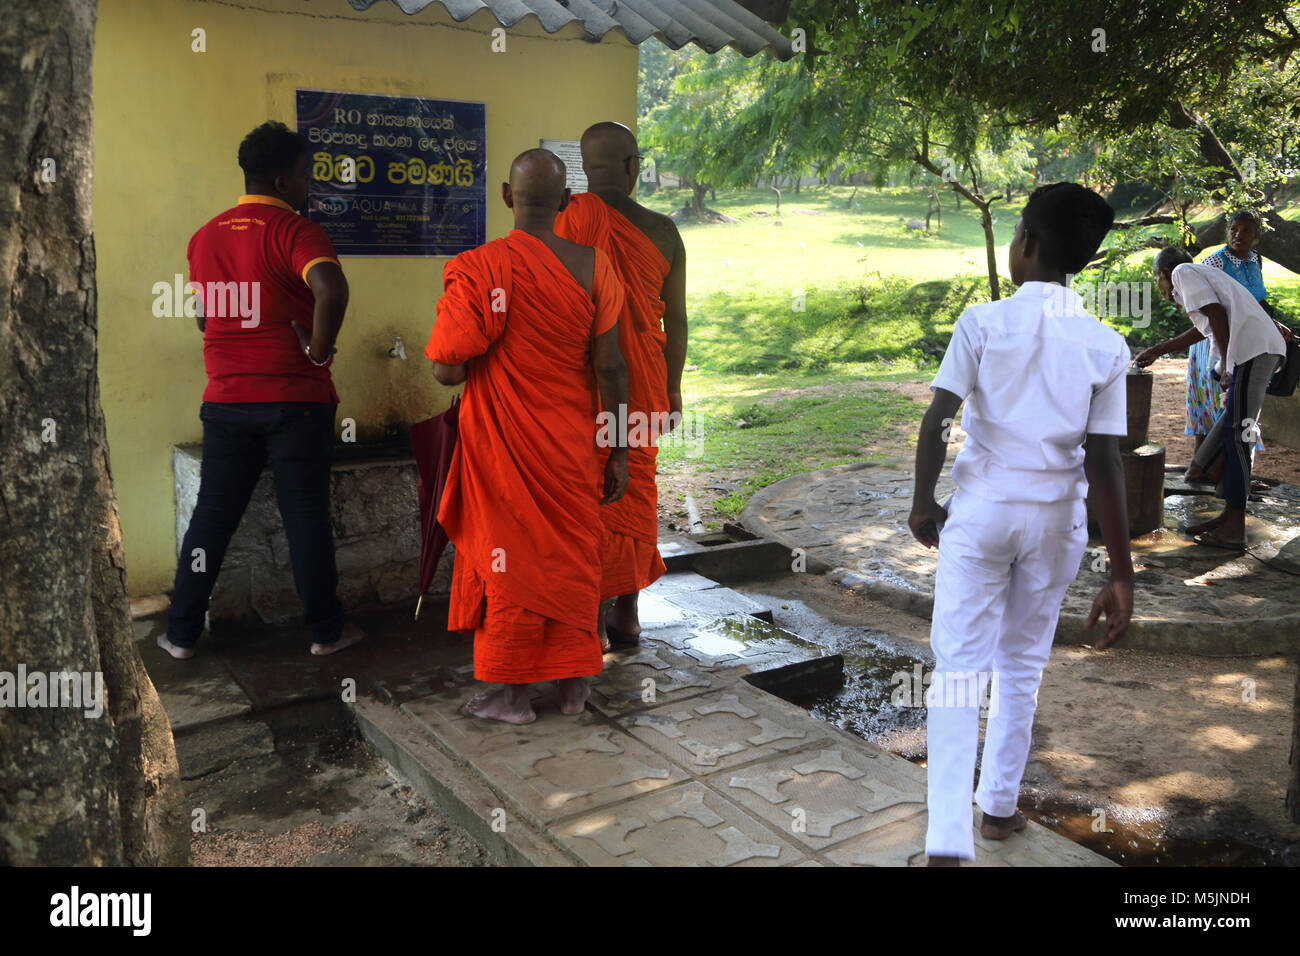 Polonnaruwa North Central Province Sri Lanka Buddhist Monks Queuing up to use Tap Stock Photo